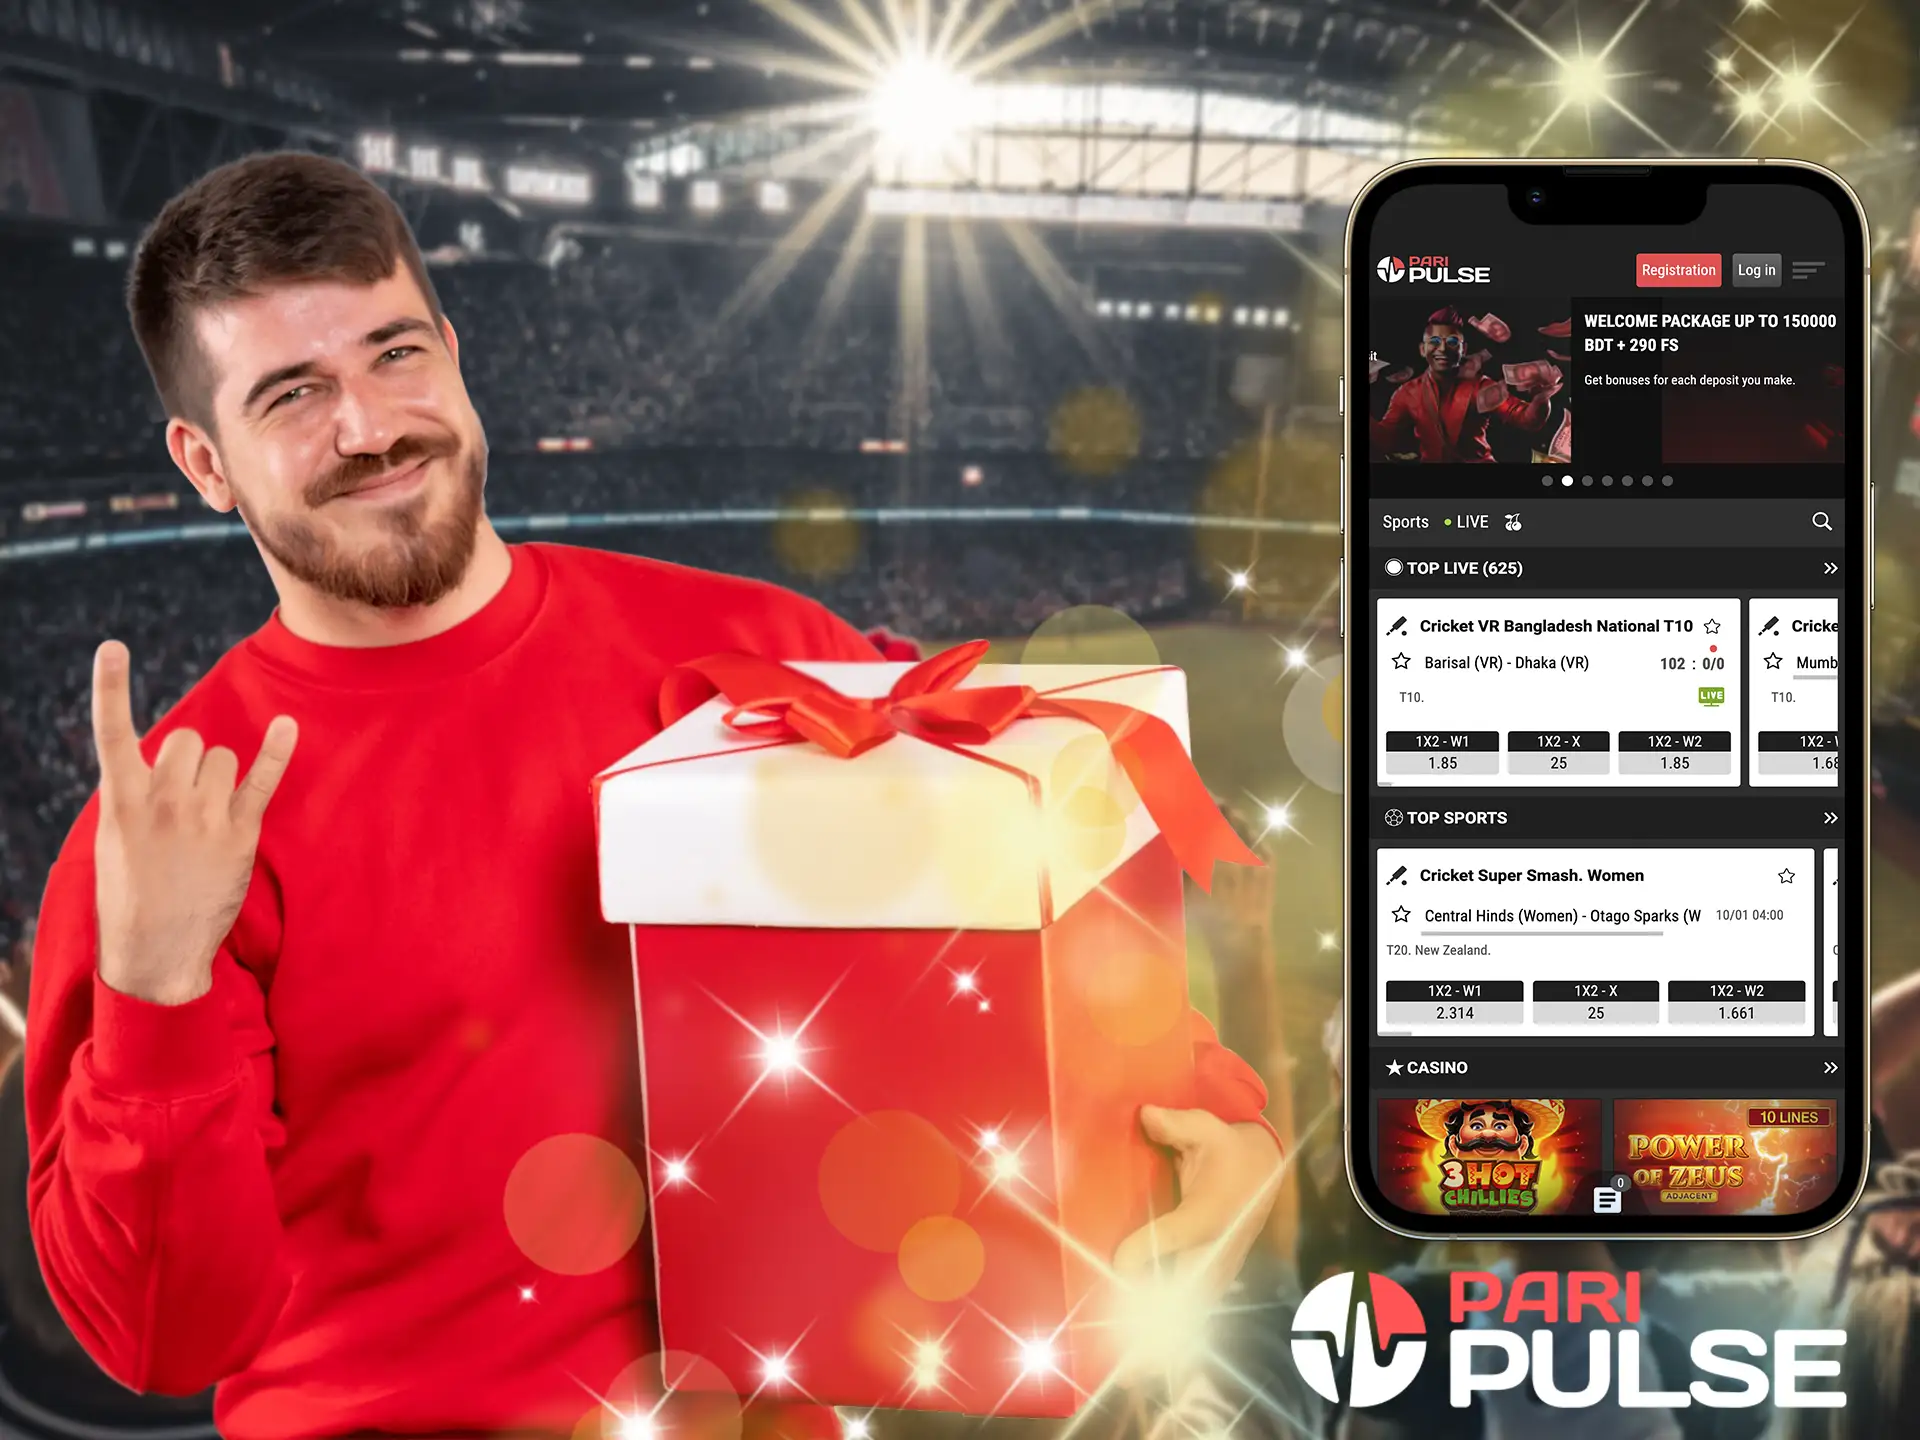 Players from Bangladesh can easily double their first betting deposit with a compliment from PariPulse.